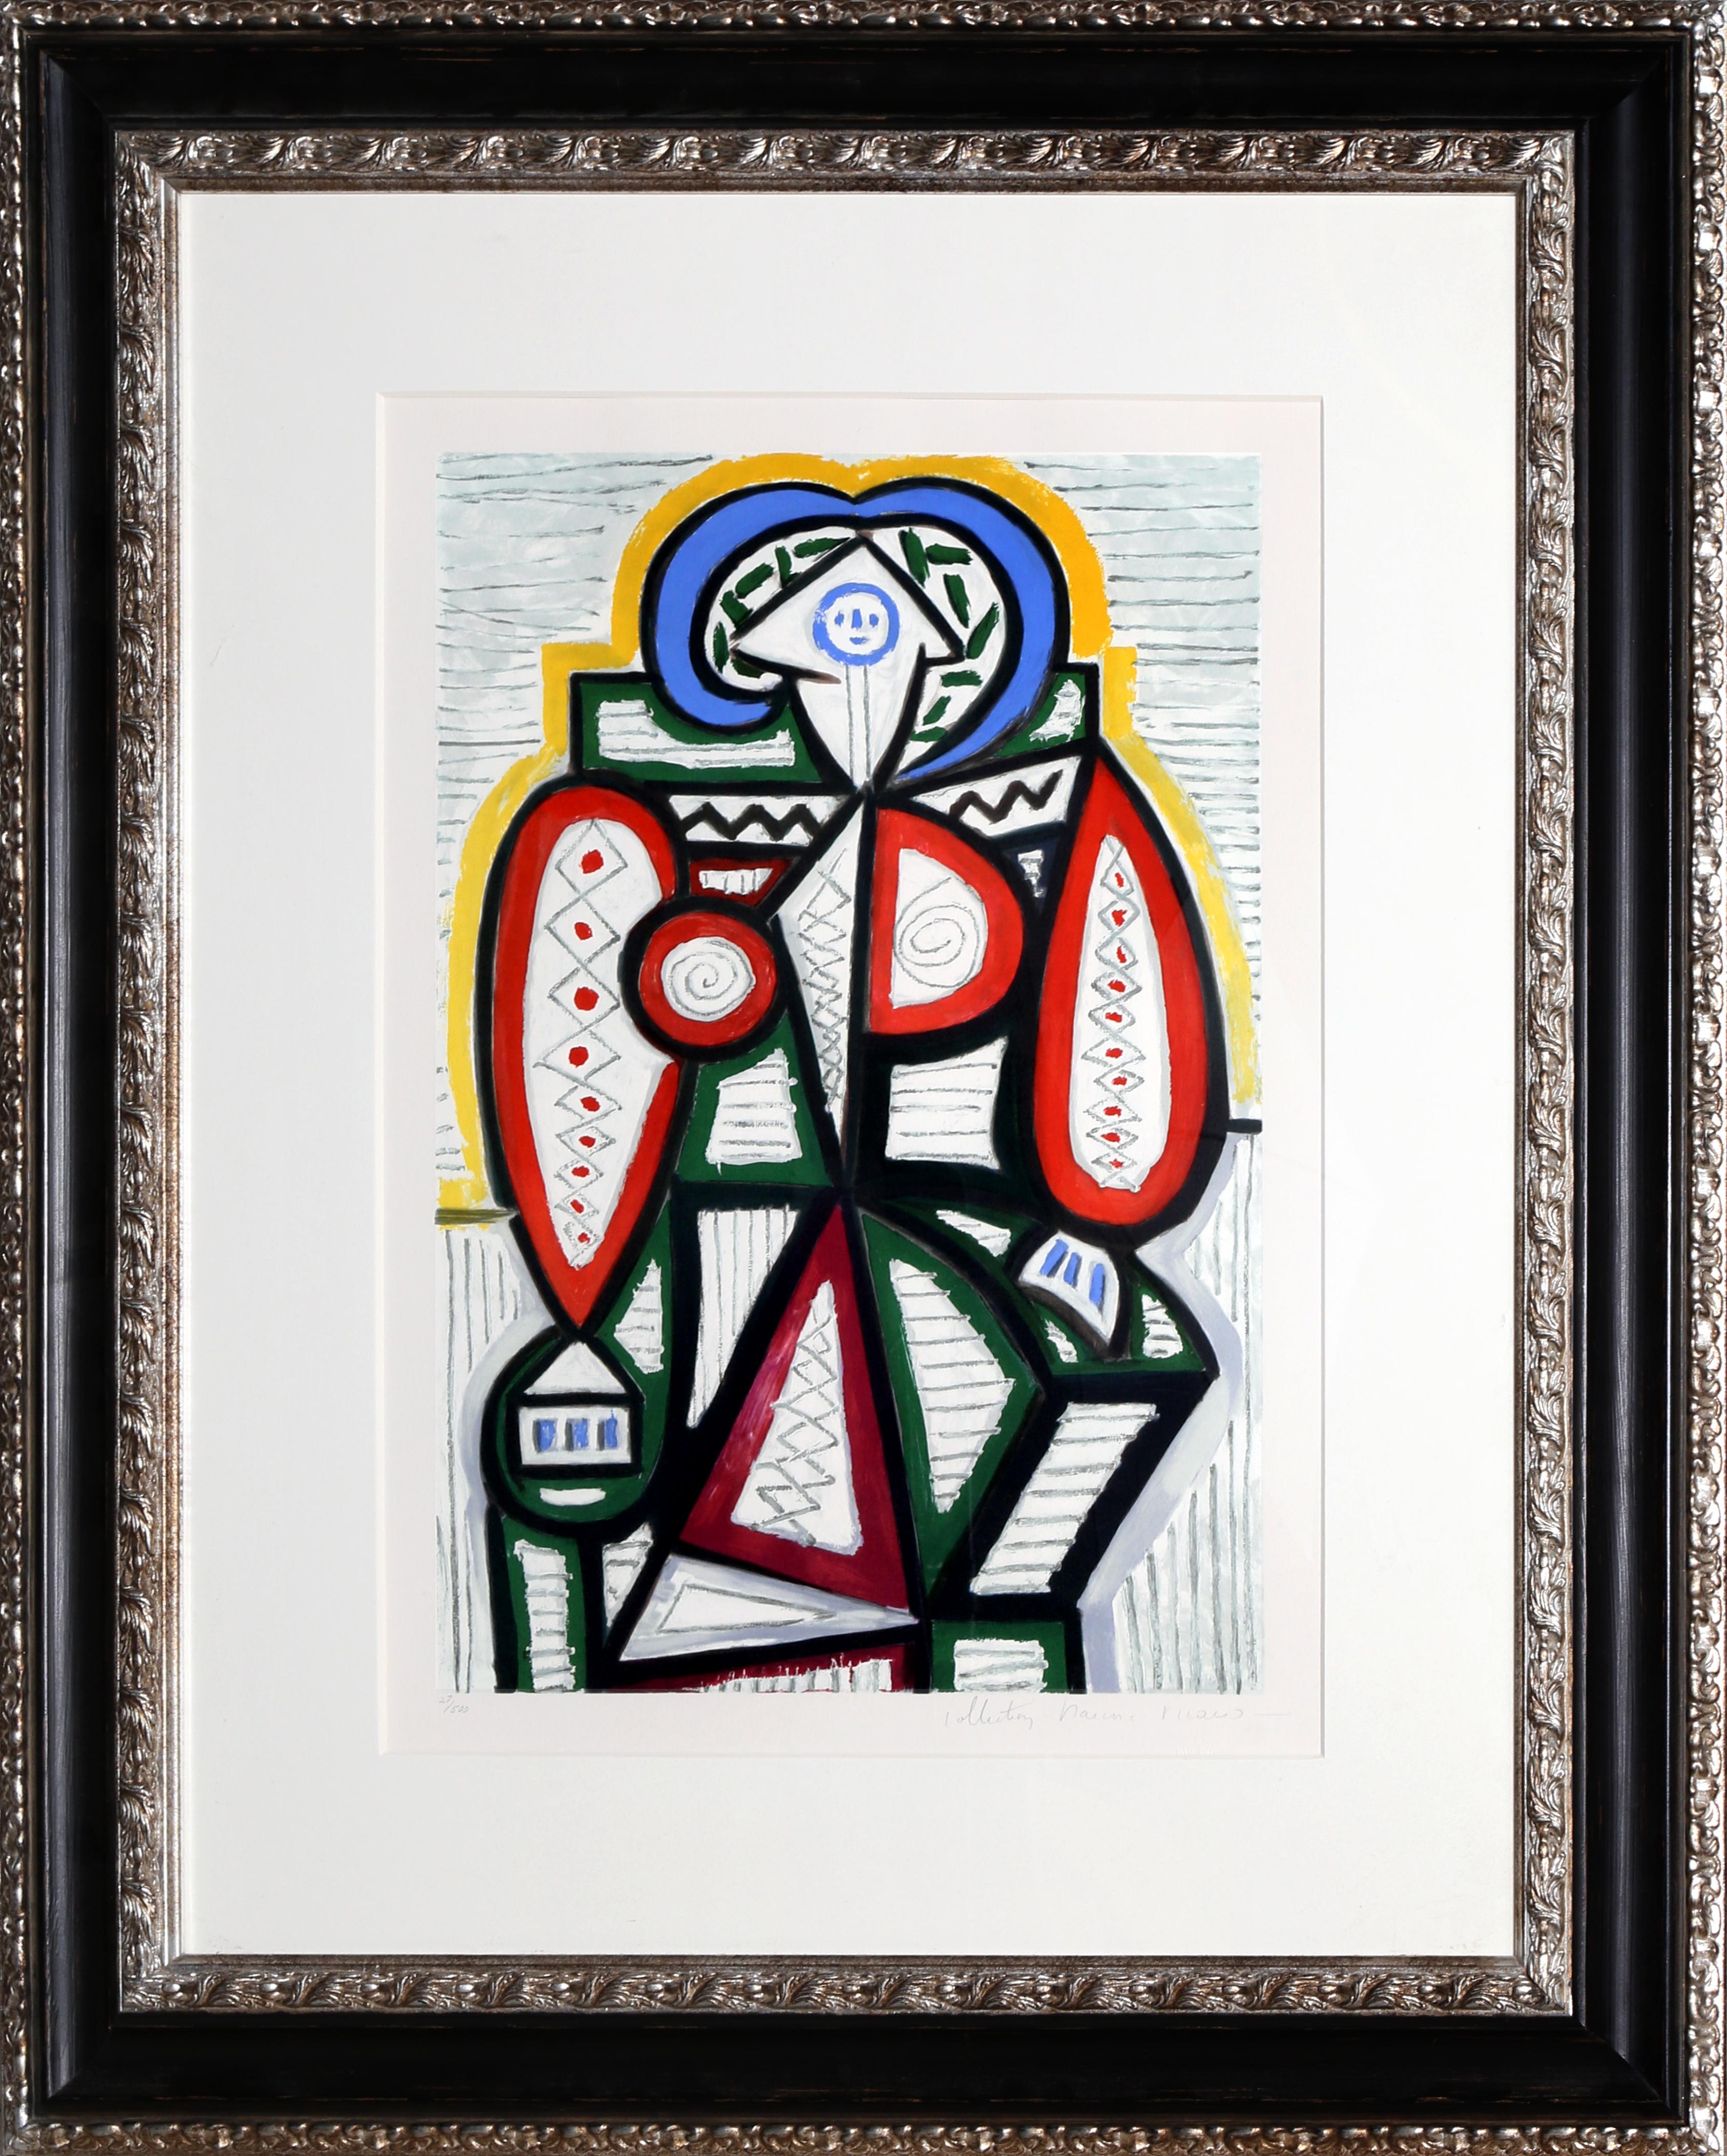 A lithograph from the Marina Picasso Estate Collection after the Pablo Picasso painting "Femme Assise". The original painting was completed in 1947. In the 1970's after Picasso's death, Marina Picasso, his granddaughter, authorized the creation of